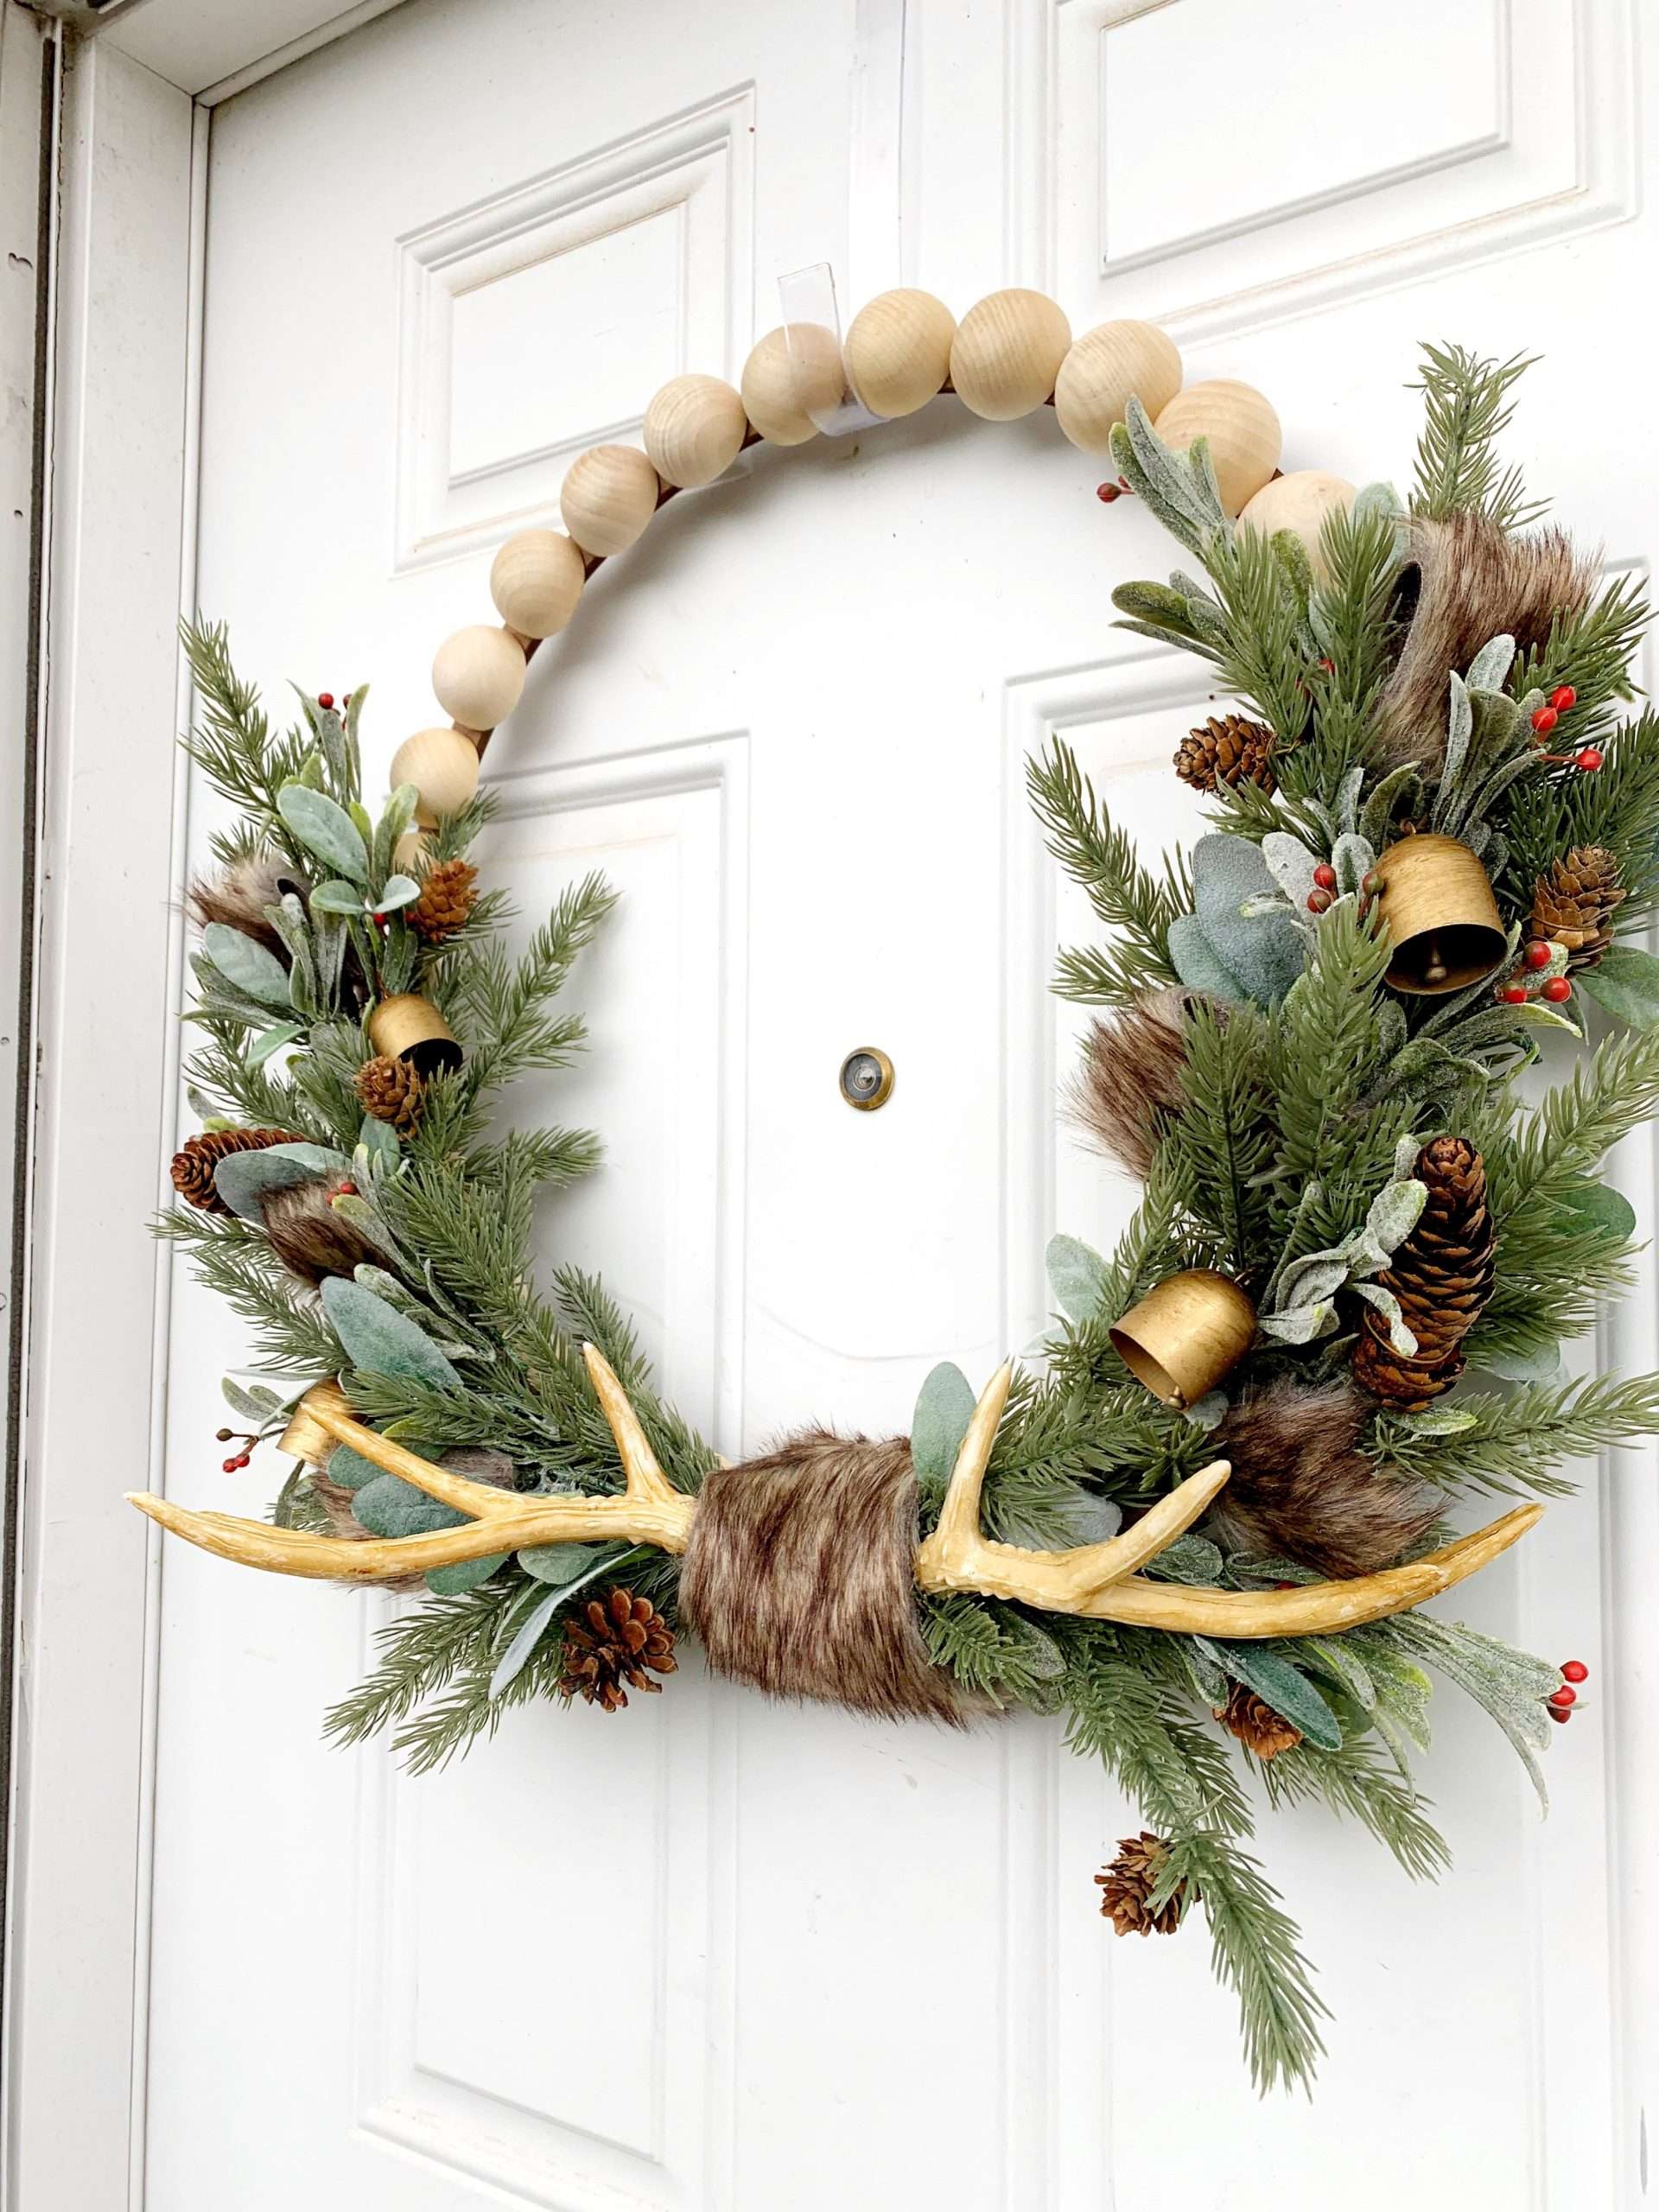 How to make a rustic wood bead Christmas wreath with antlers and bells.